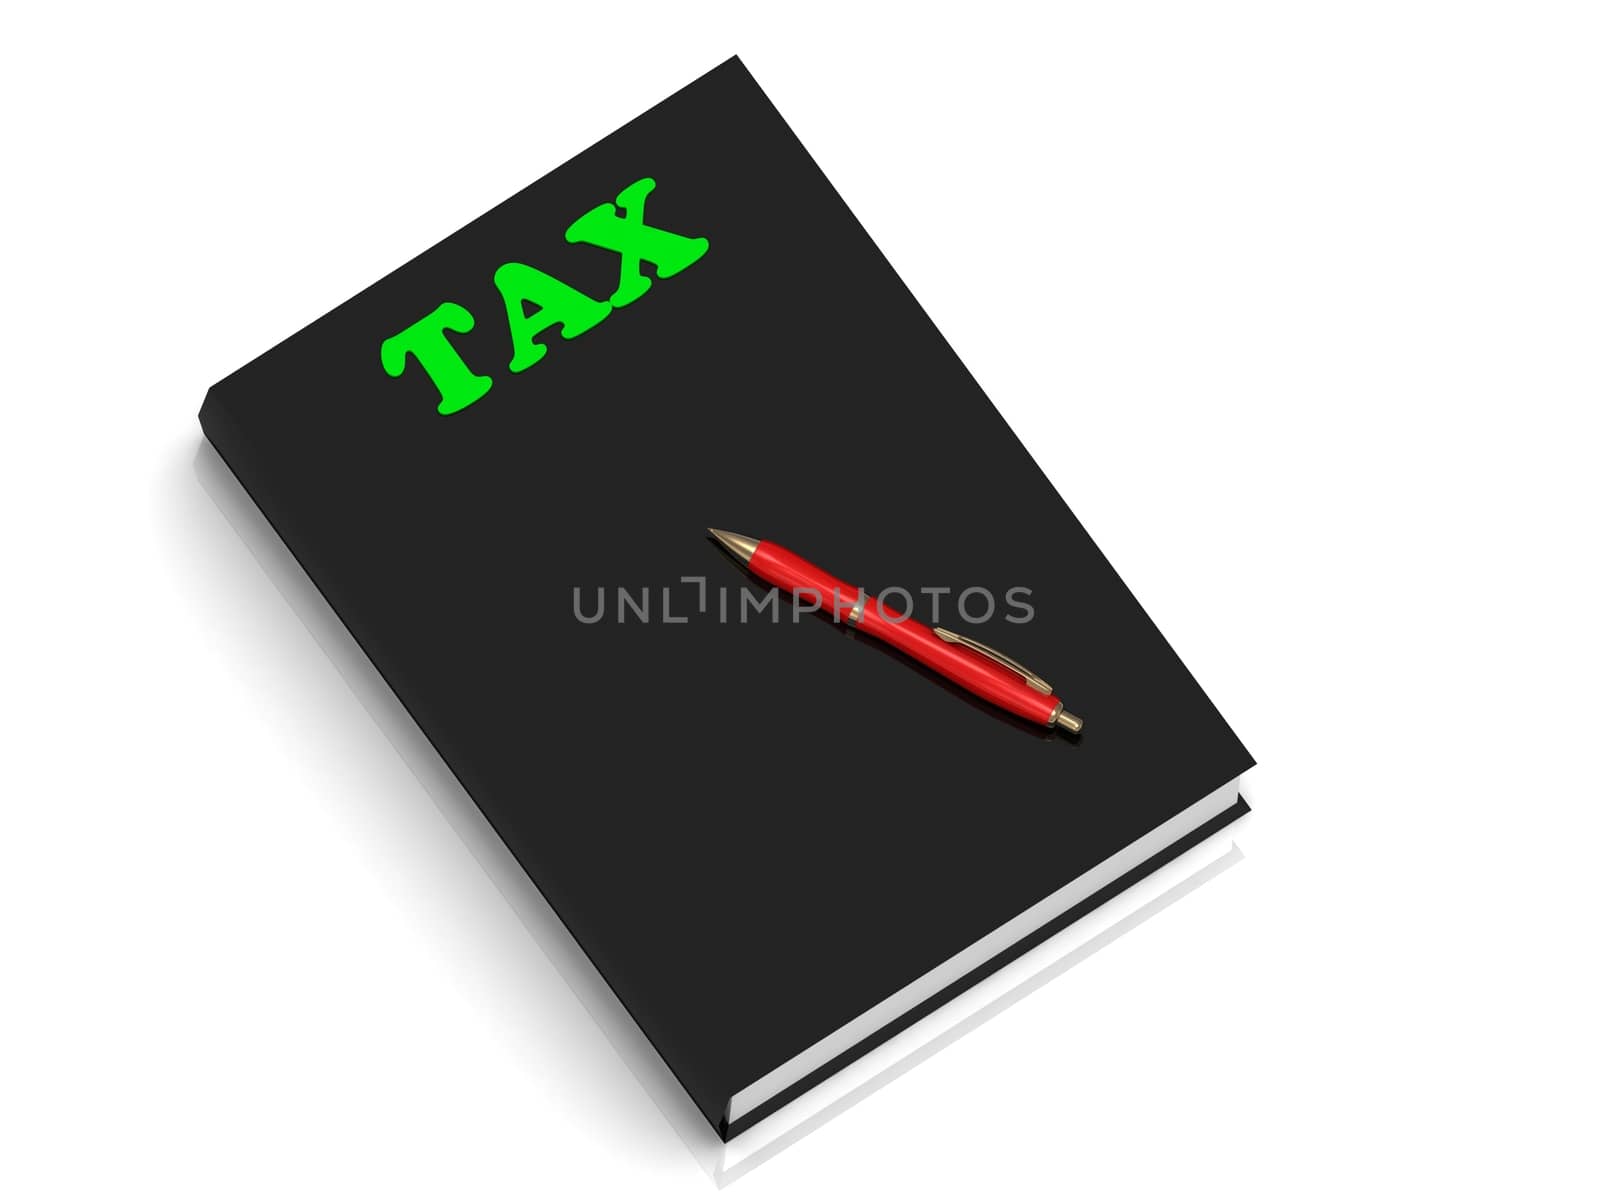 TAX- inscription of green letters on black book on white background